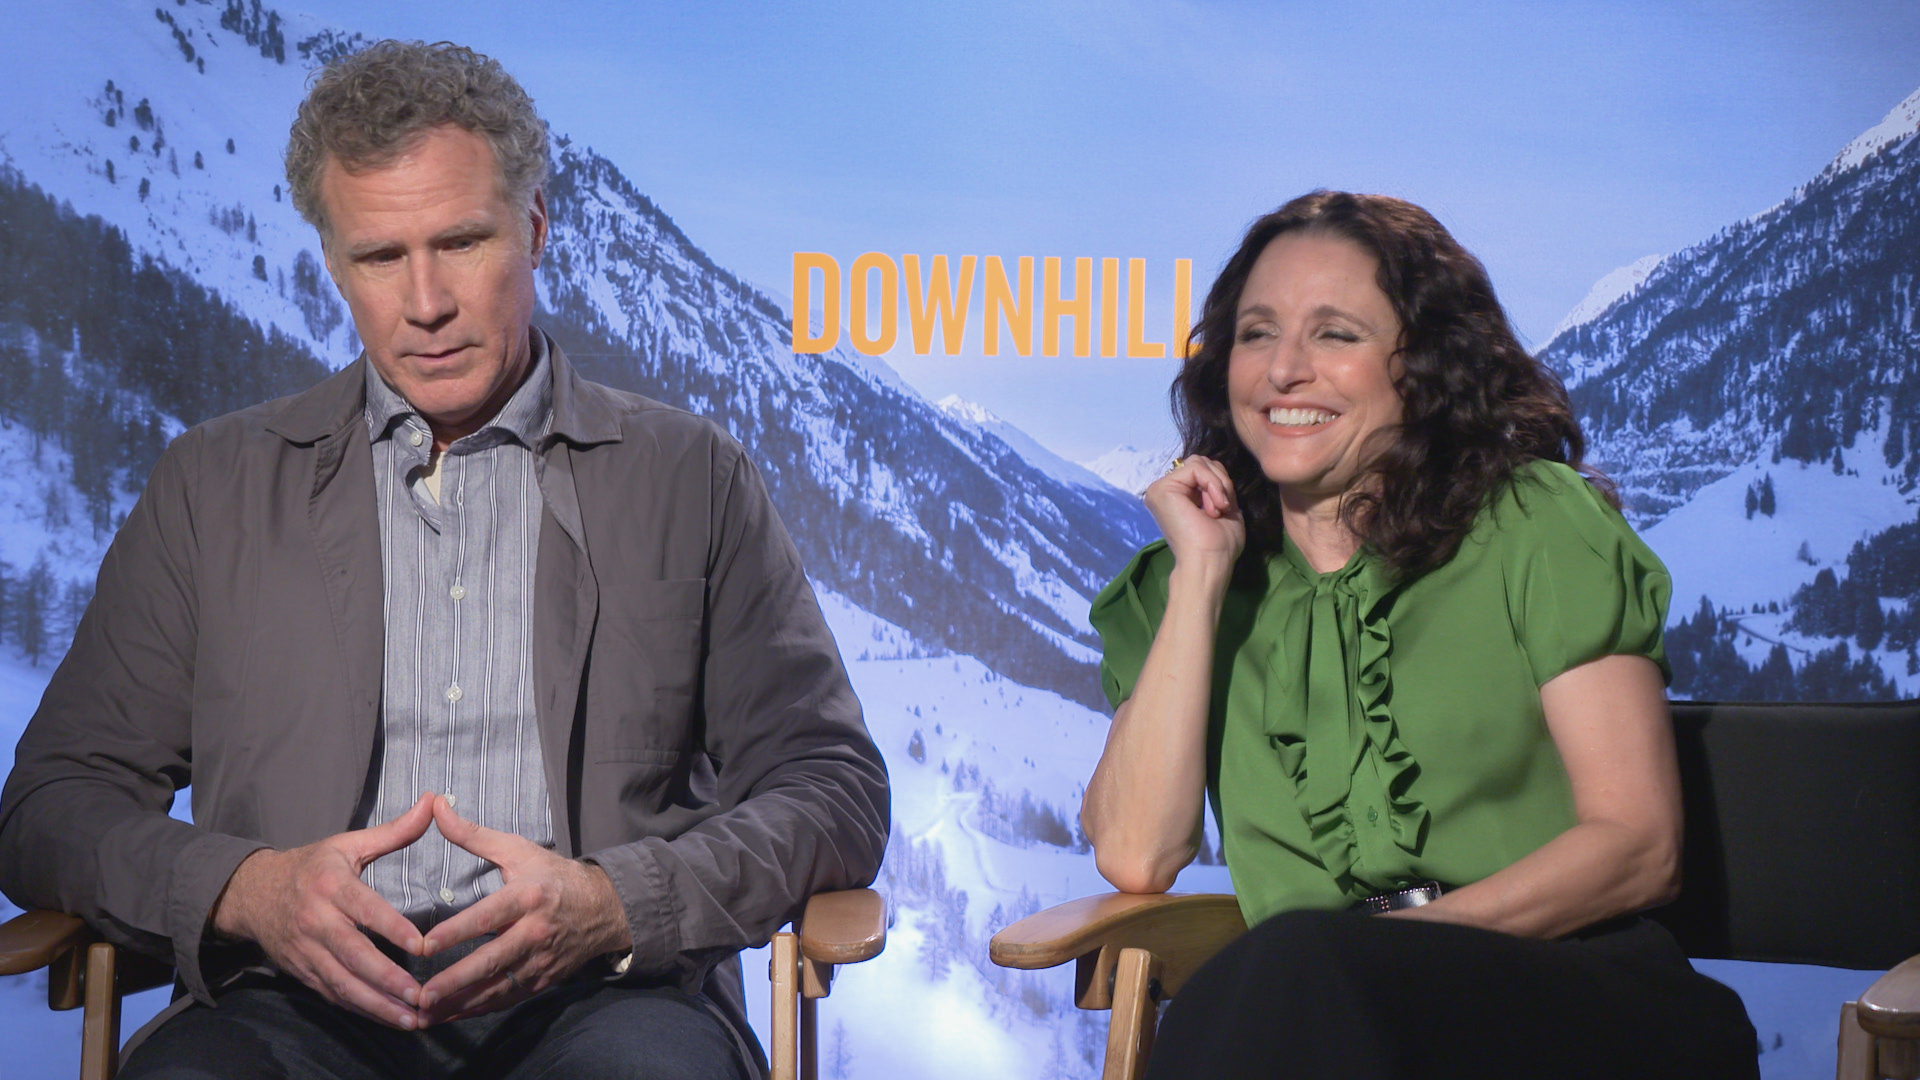 Kelli Gillespie talked to the two actors about the importance of communication in marriage and what it was like shooting the film in the Alps.